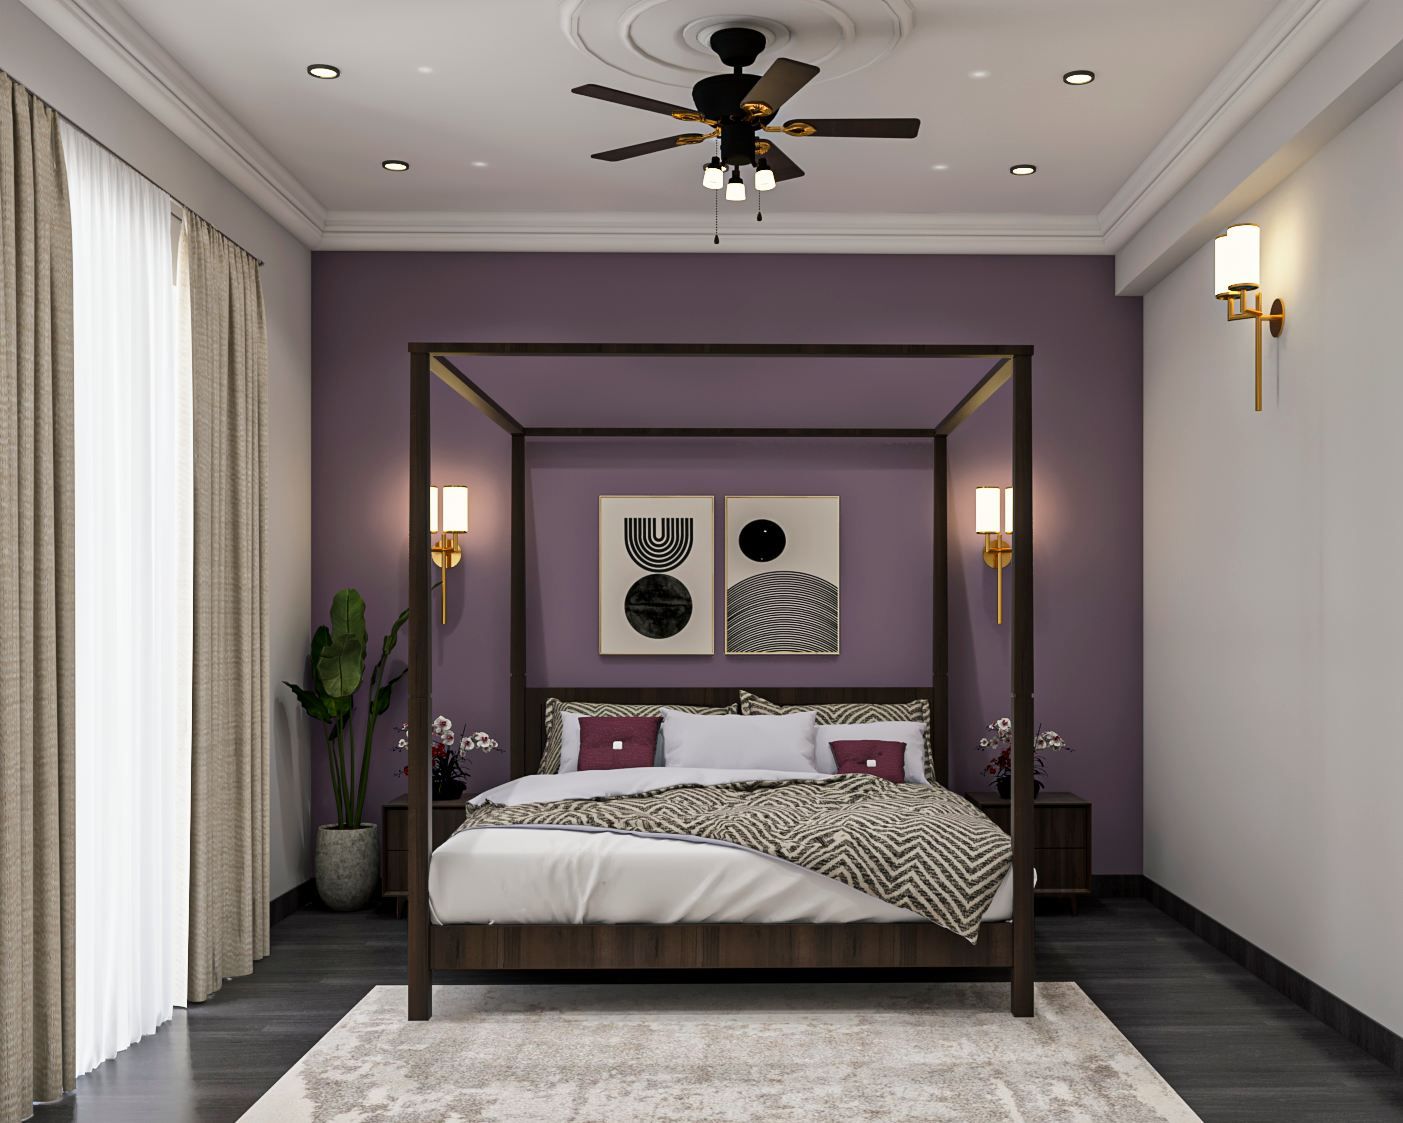 Mid-Century Modern Themed Guest Bedroom Design With Purple Accent Wall